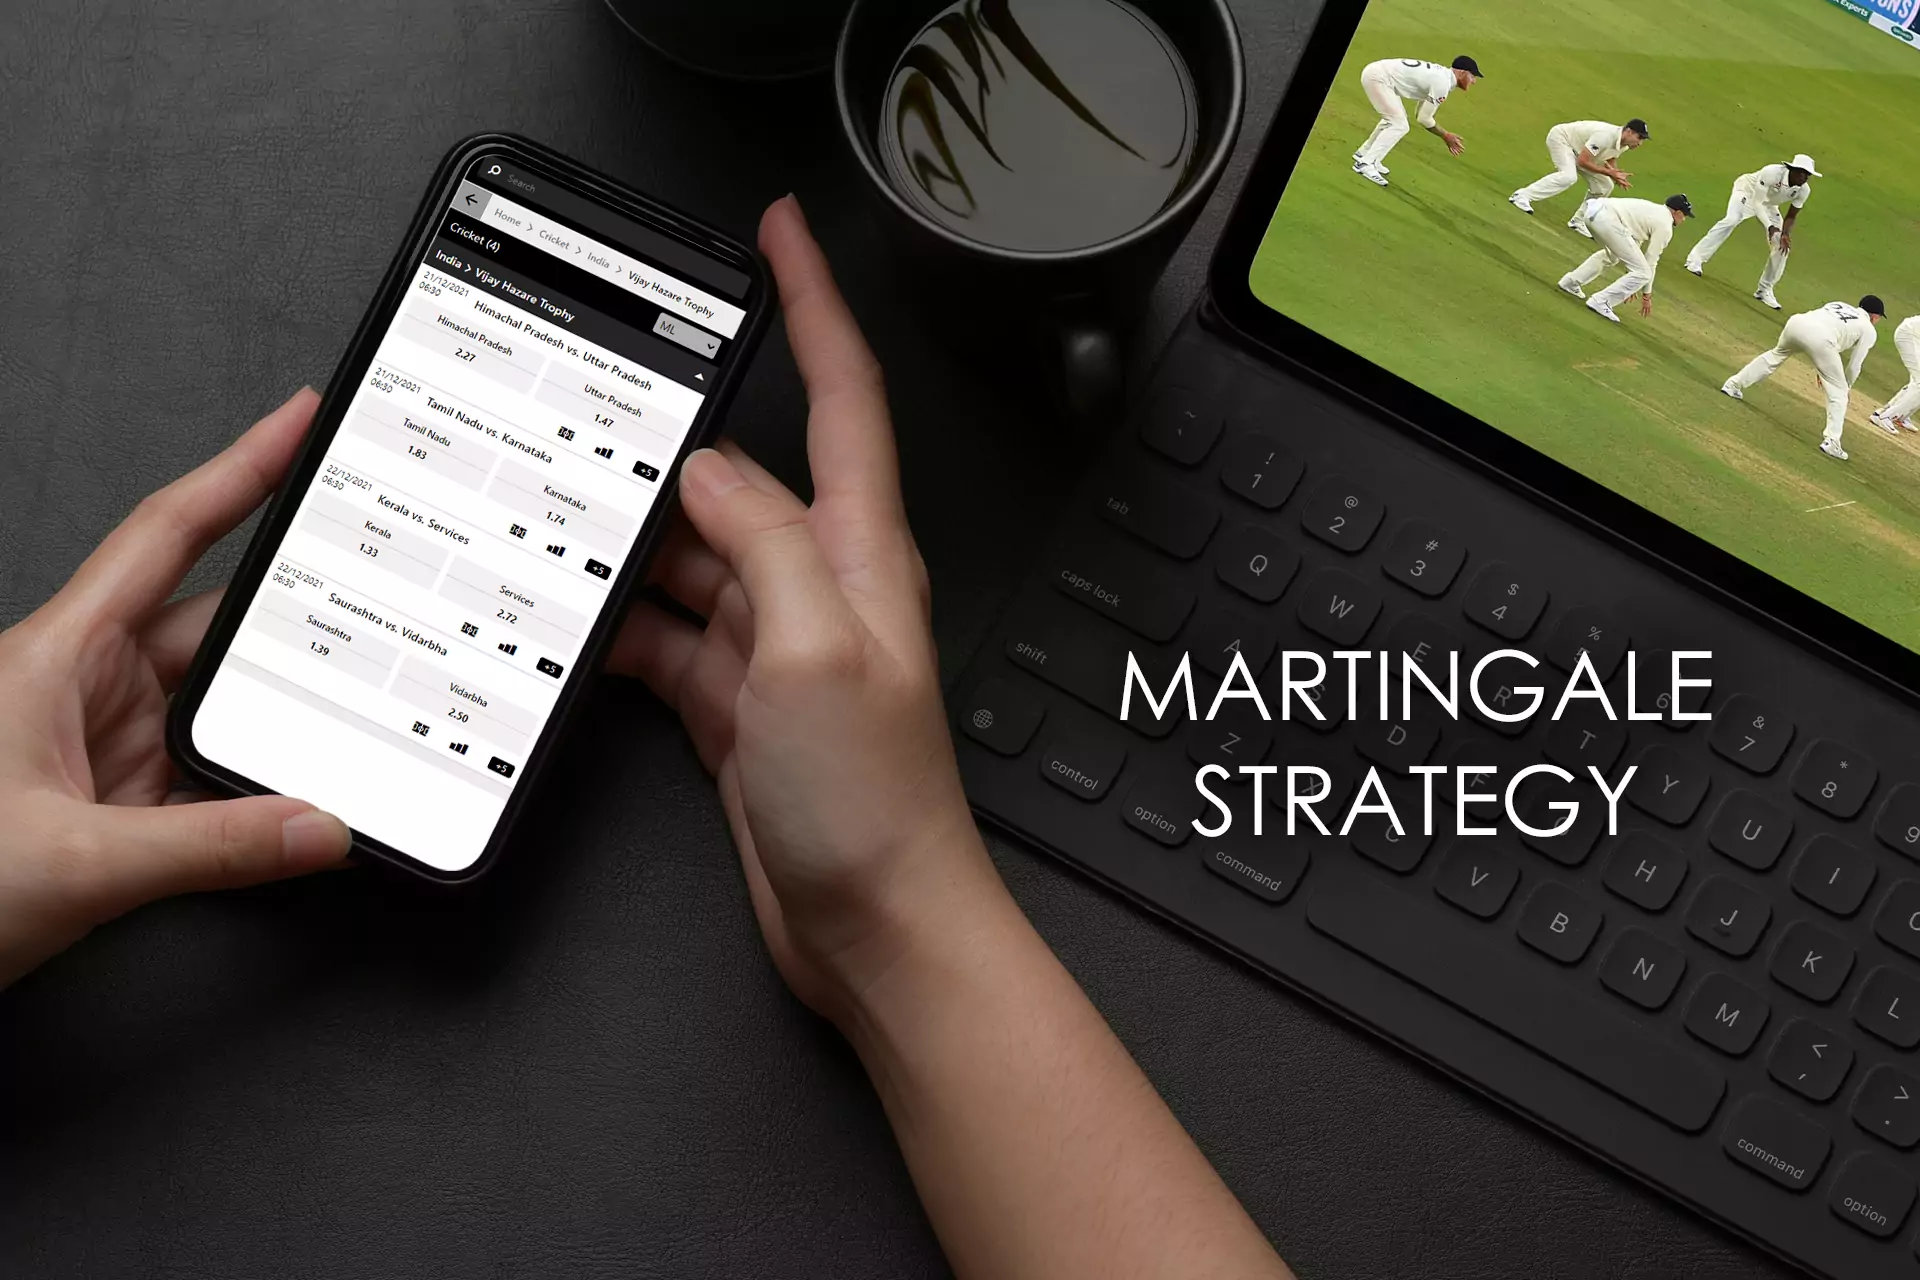 Martingale strategy is a variant of the Dogon Betting Strategy.